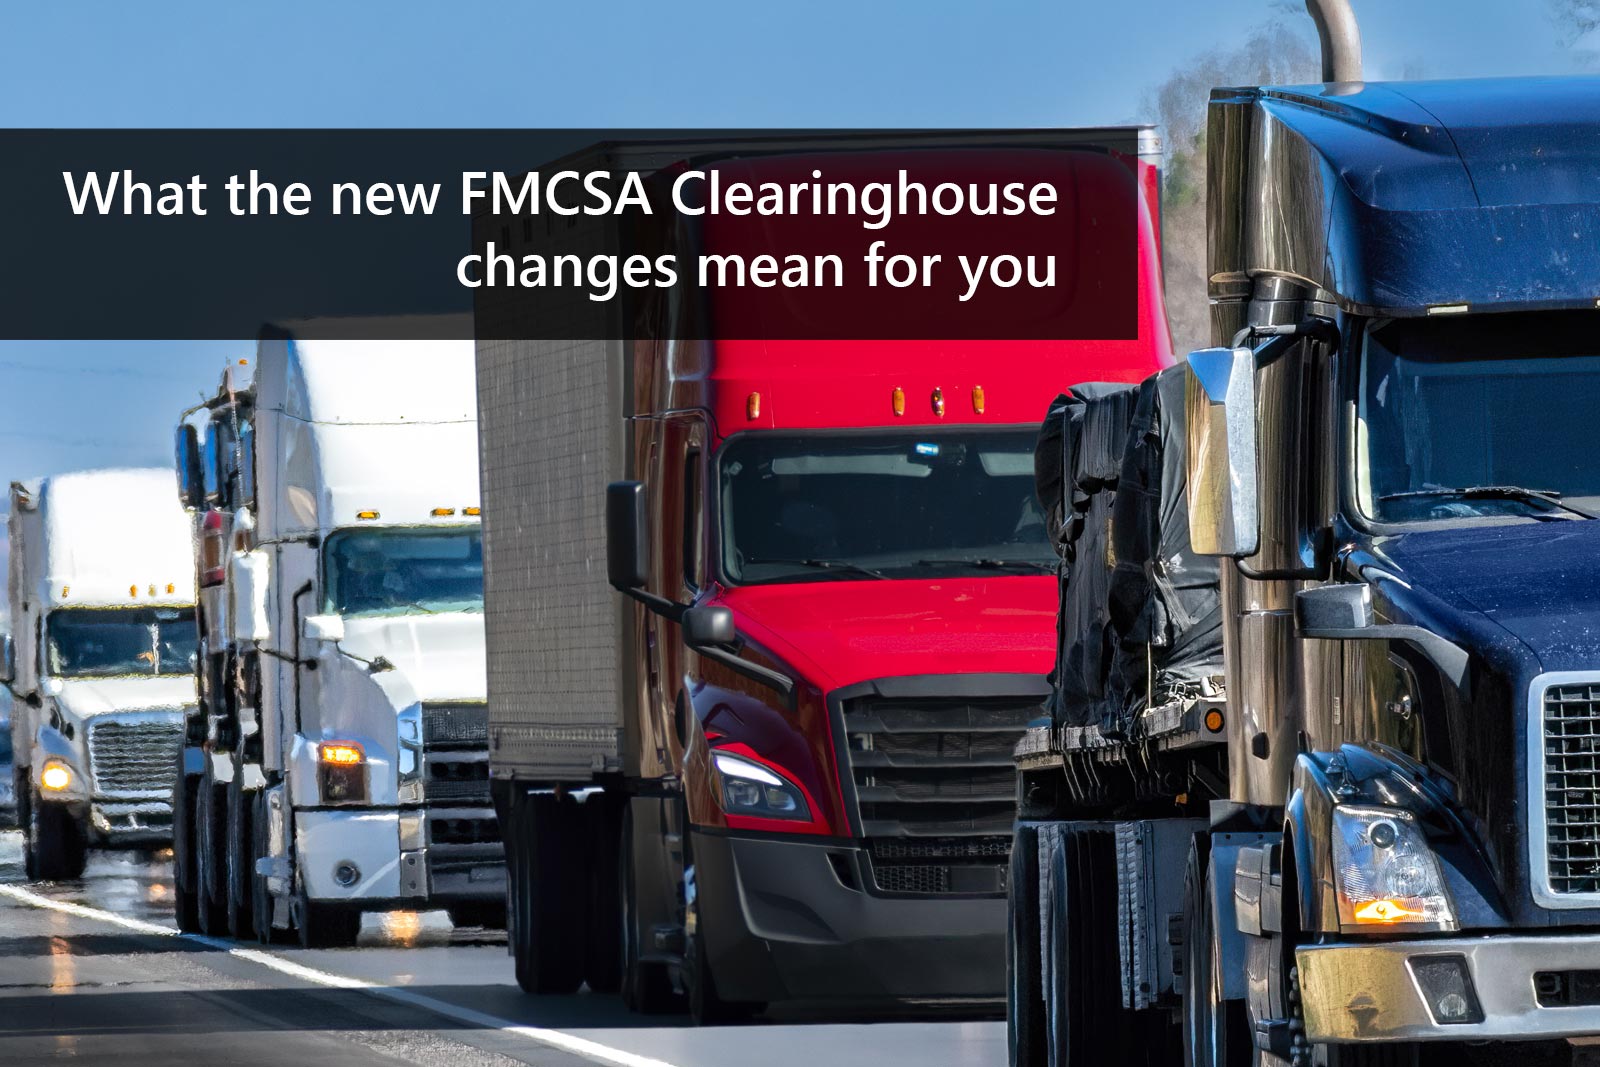 What the new FMCSA Clearinghouse changes mean for you